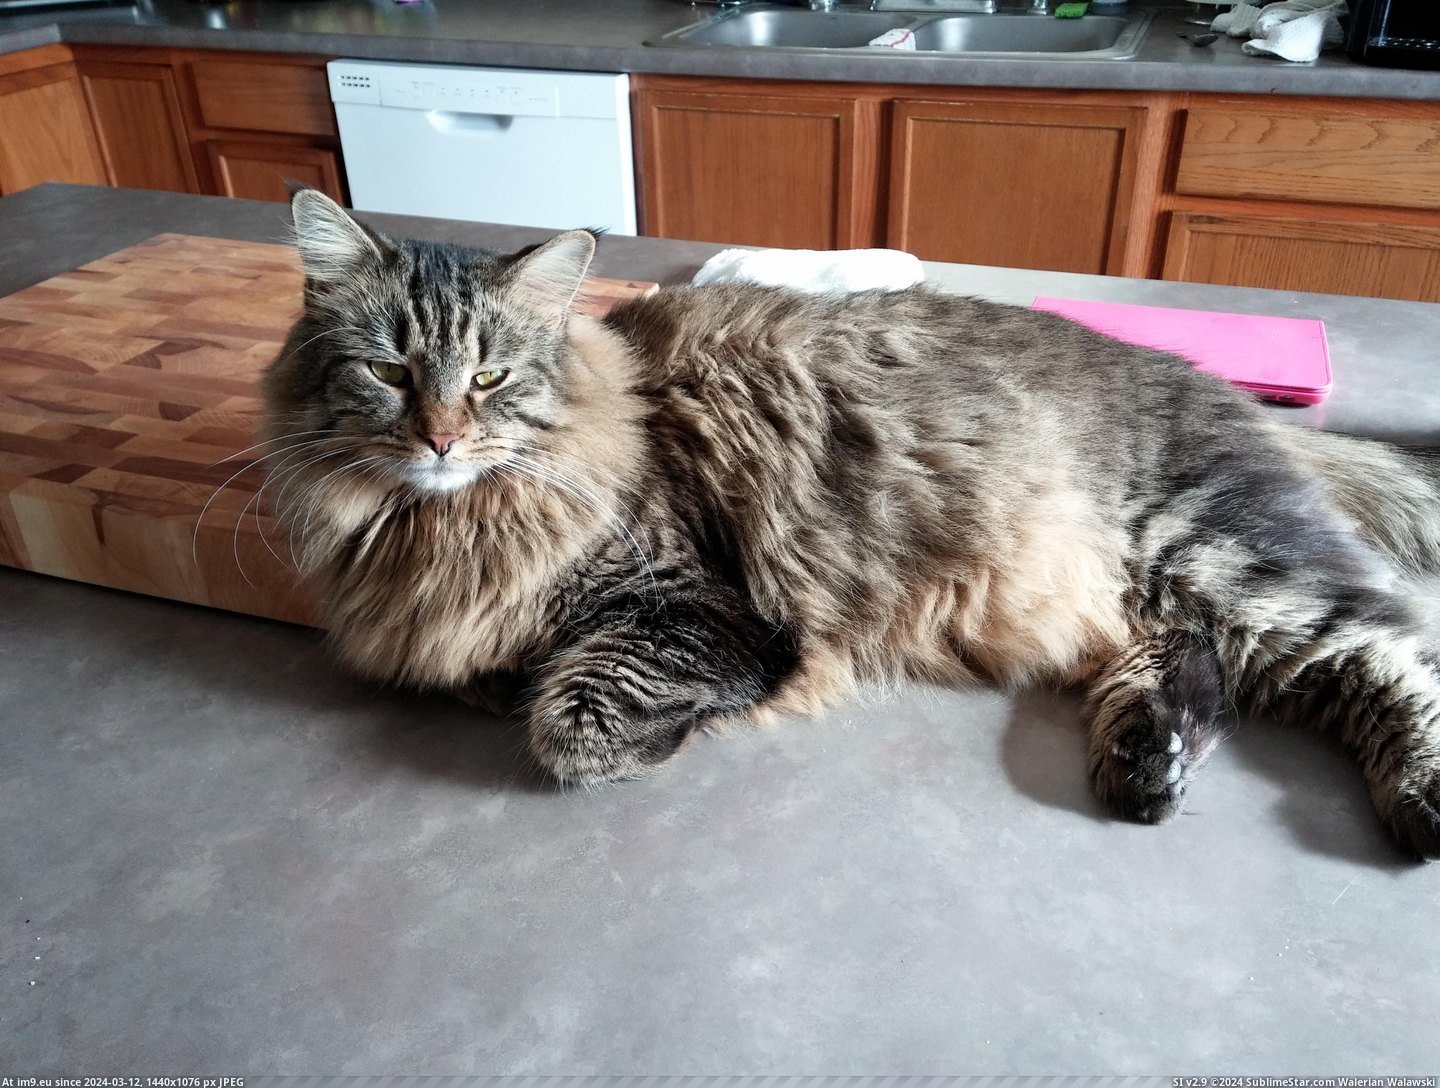 #Cats #Cat #Fluffy #Malak #Outgoing #Boy #Super [Cats] My cat Malak, a super outgoing and fluffy boy, he's the best. 4 Pic. (Image of album My r/CATS favs))